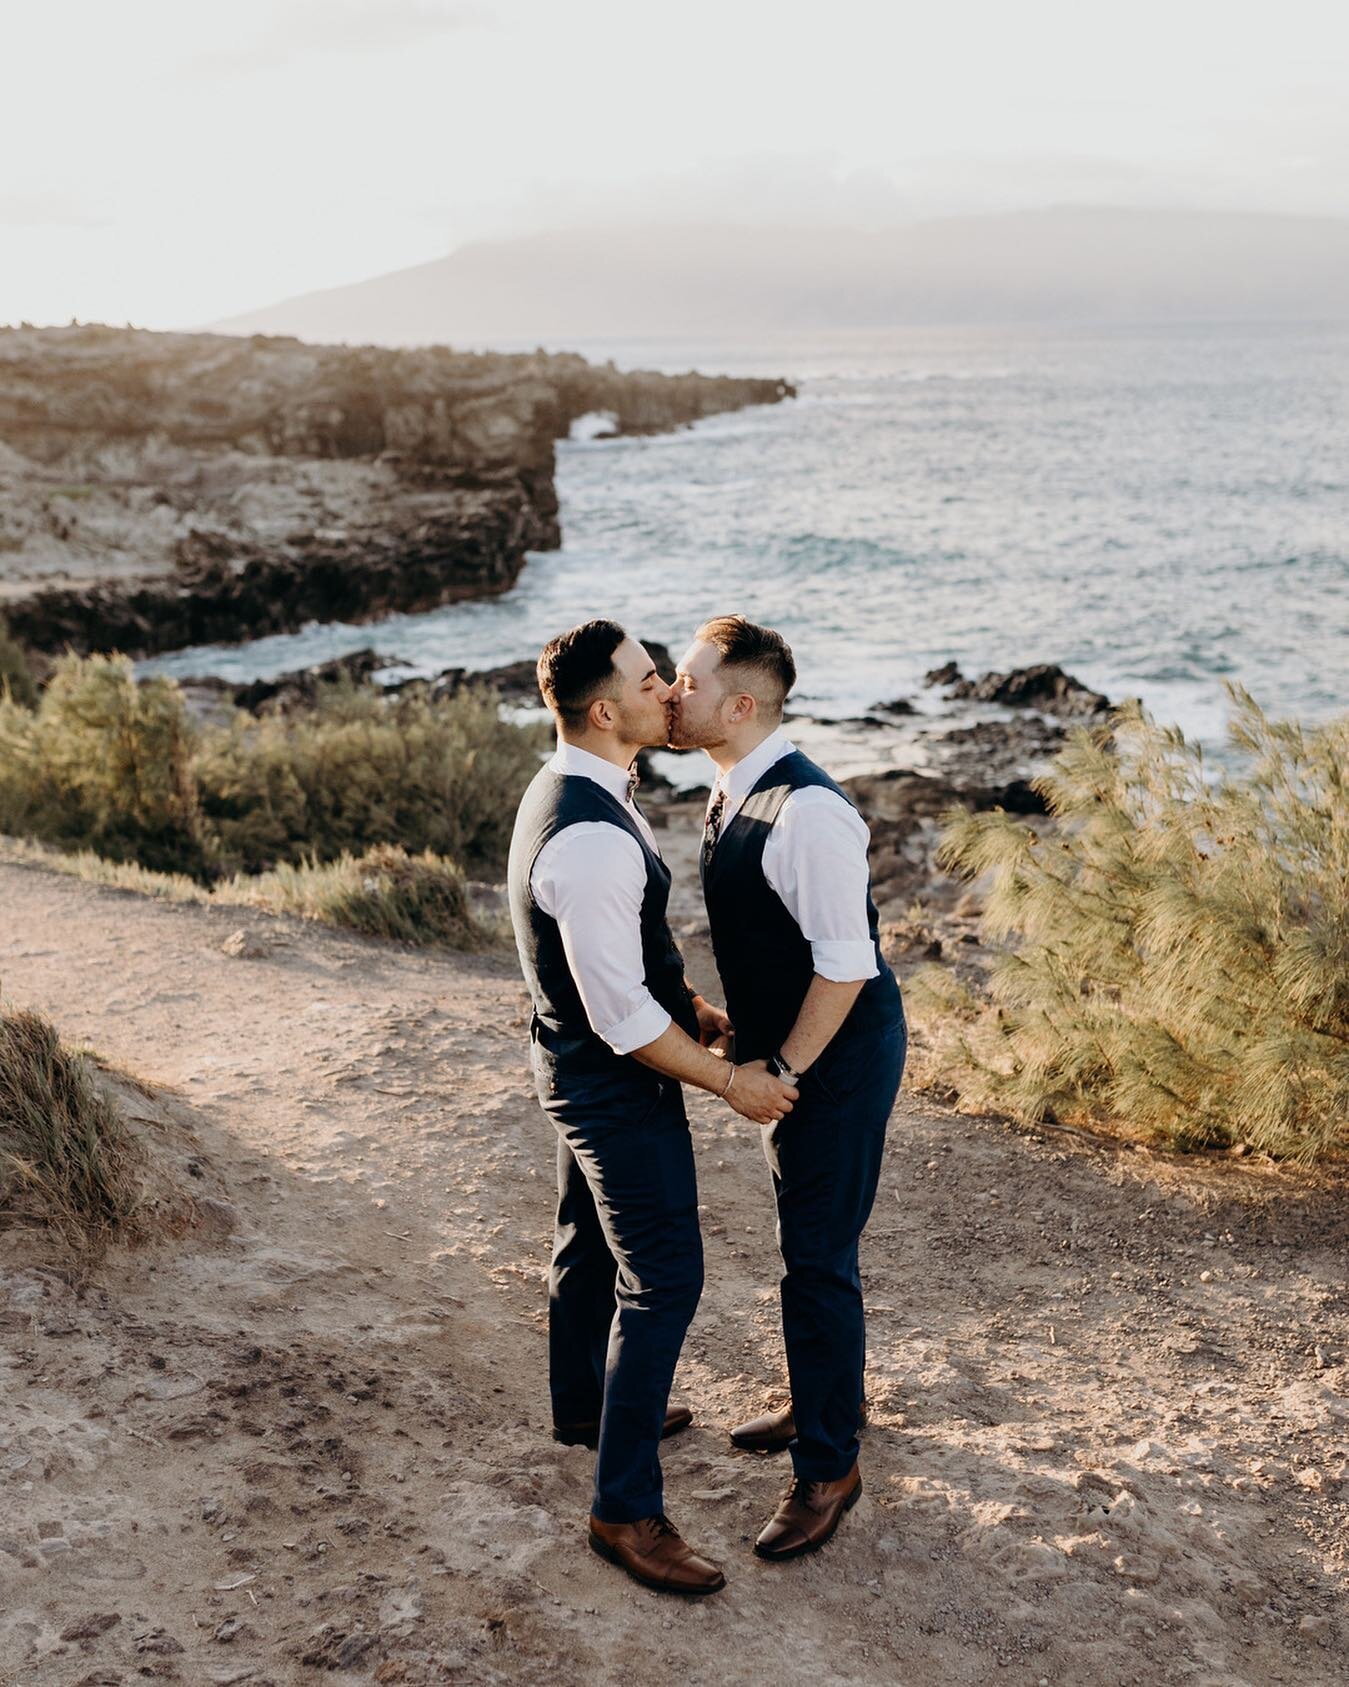 Reminder to stop and give your person some kisses! 😘
.
.
.
.
.
.
. 
#lgbtqphotographermaui #lgbtqmaui #lgbtqphotgrapher #mauilgbtqphotography #lgbtqelopement #mauigaywedding #mauiqueerweddingphotographer #queerweddingmaui #queerphotographermaui #des